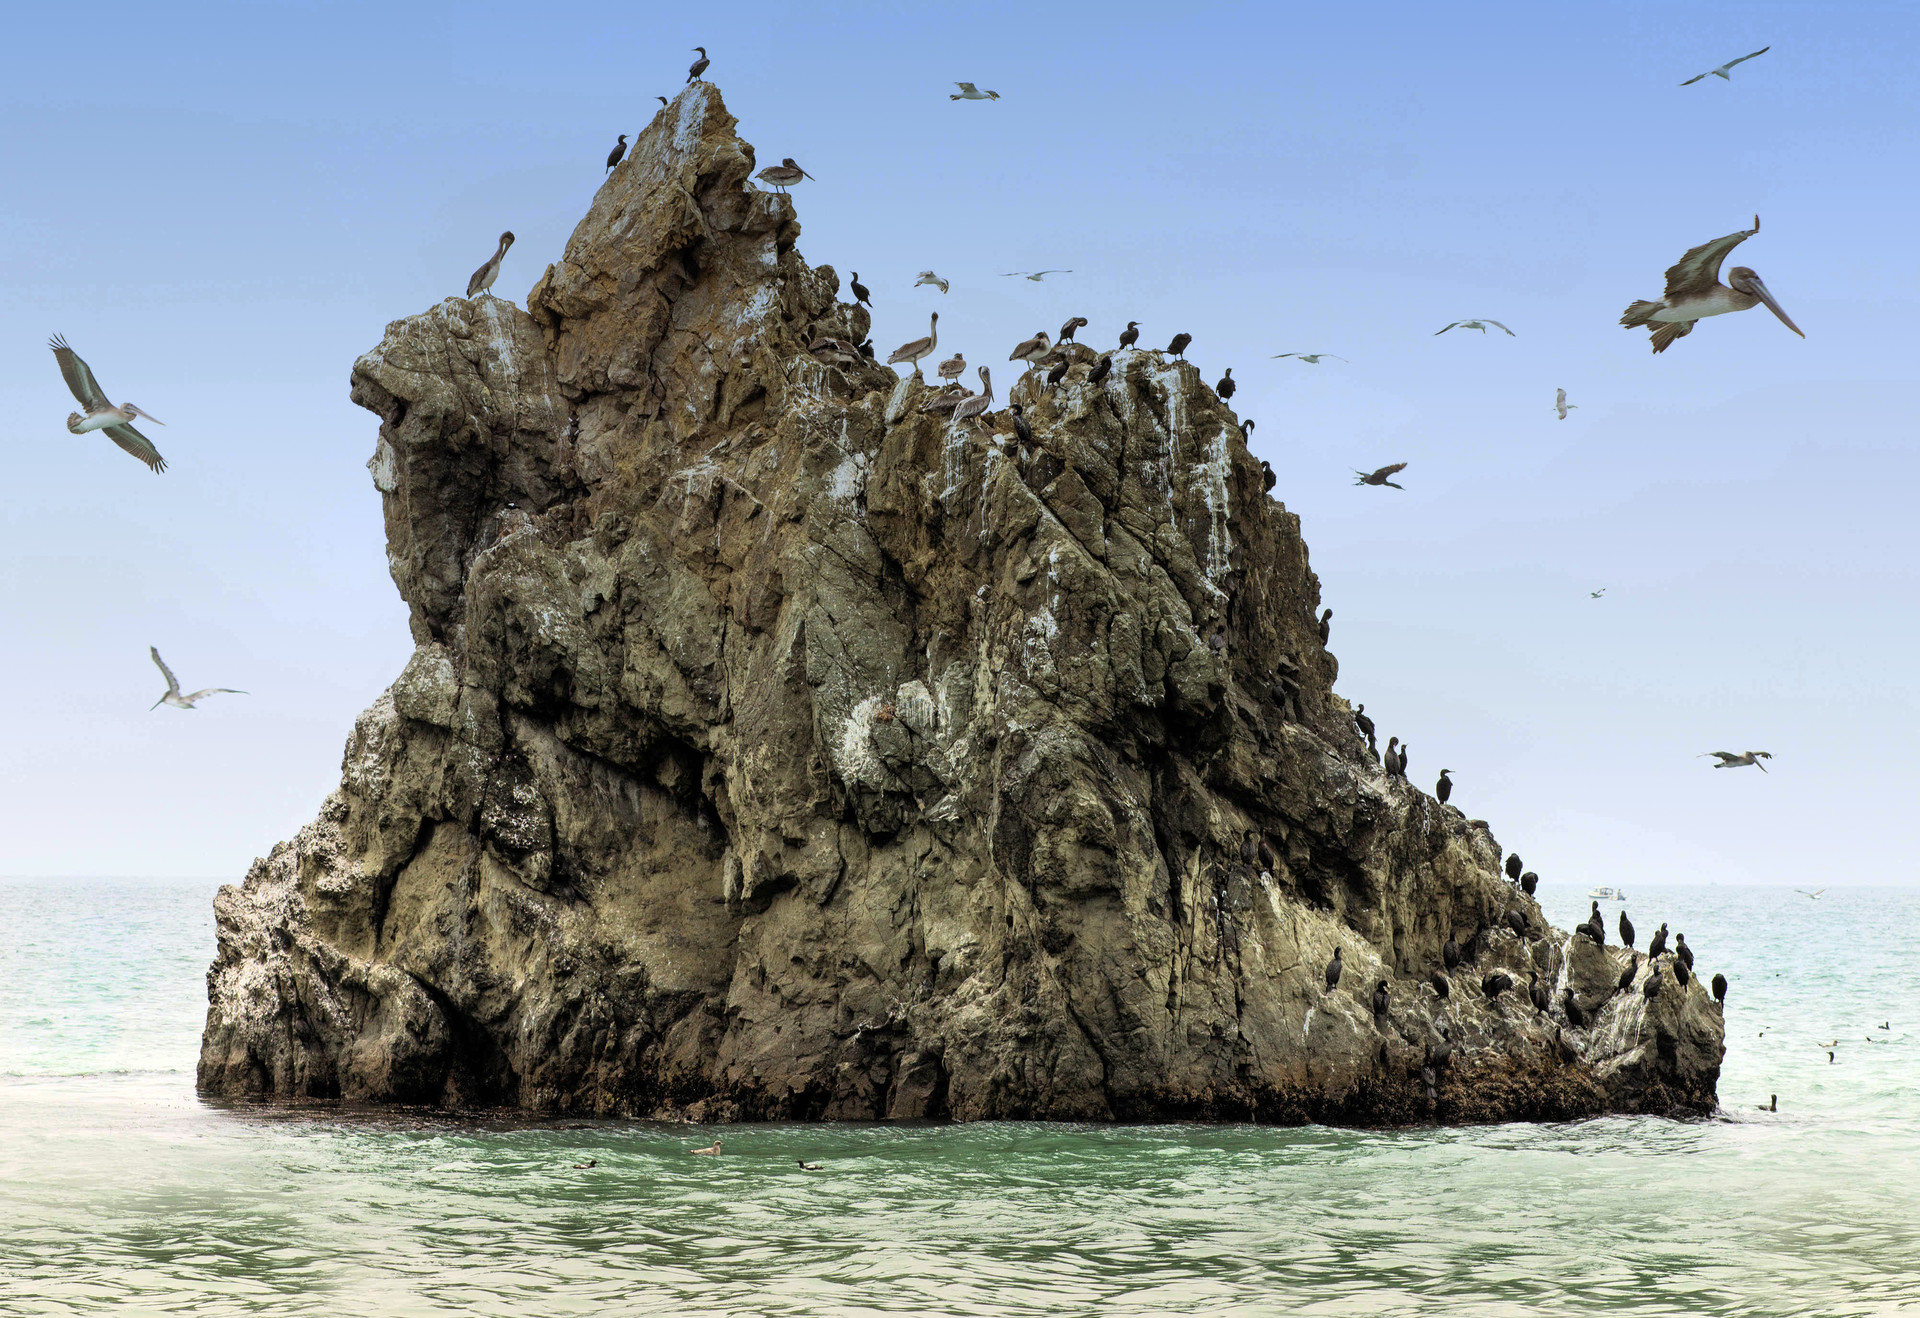 a variety of birds sit on and fly around an offshore rock